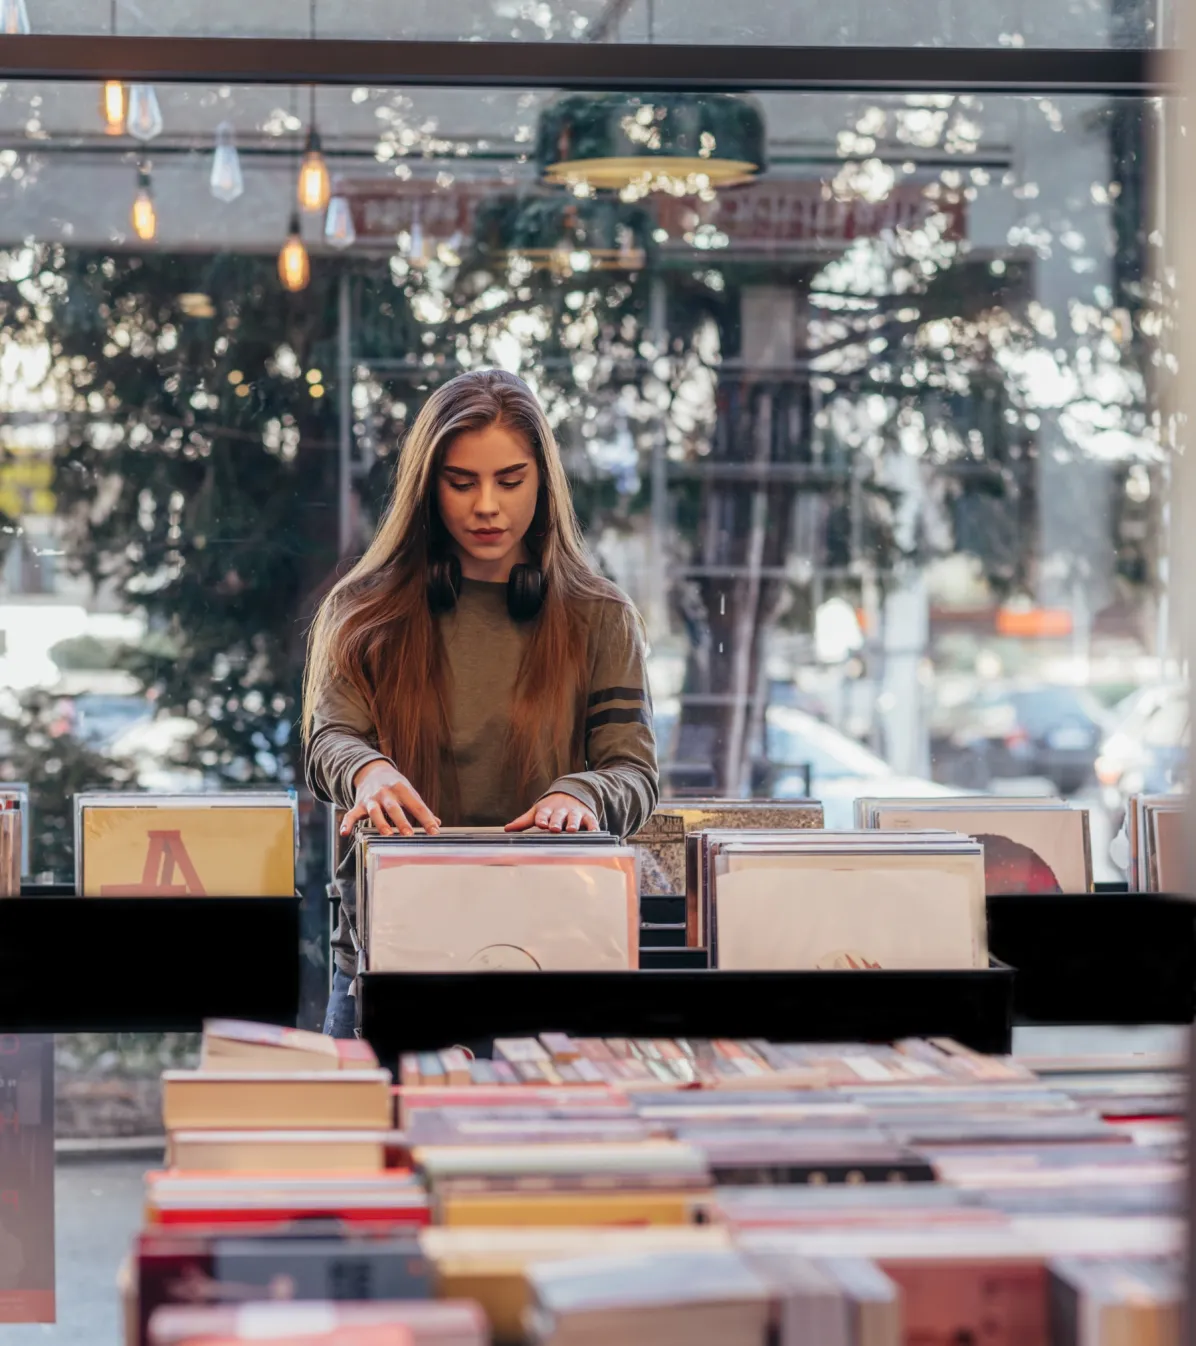 people in person payments woman choosing vinyl record music